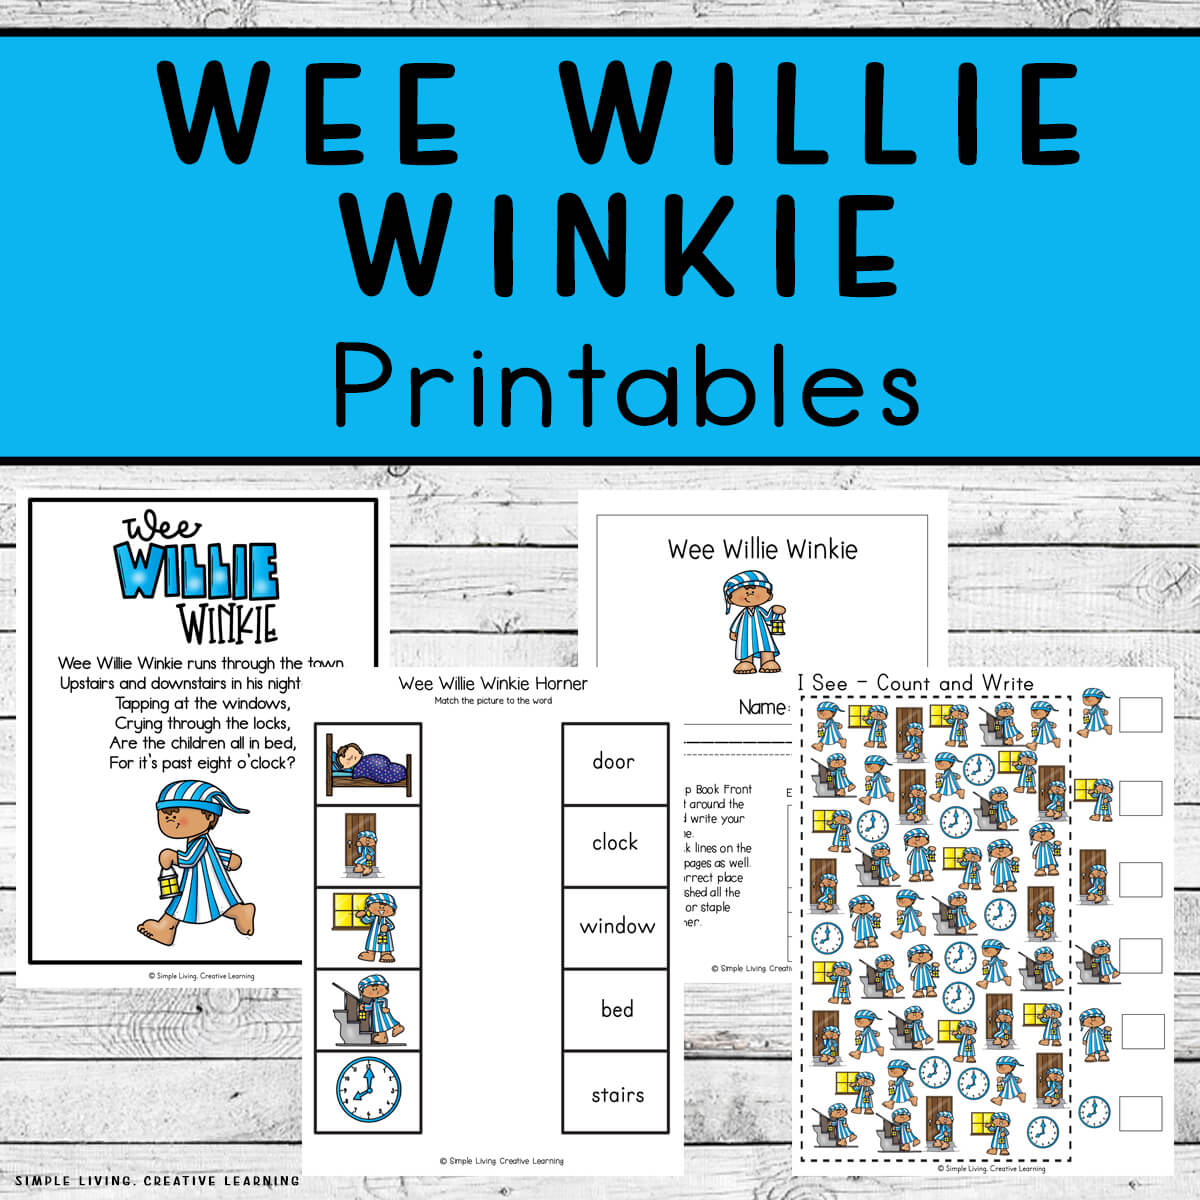 Wee Willie Winkie Printables four pages